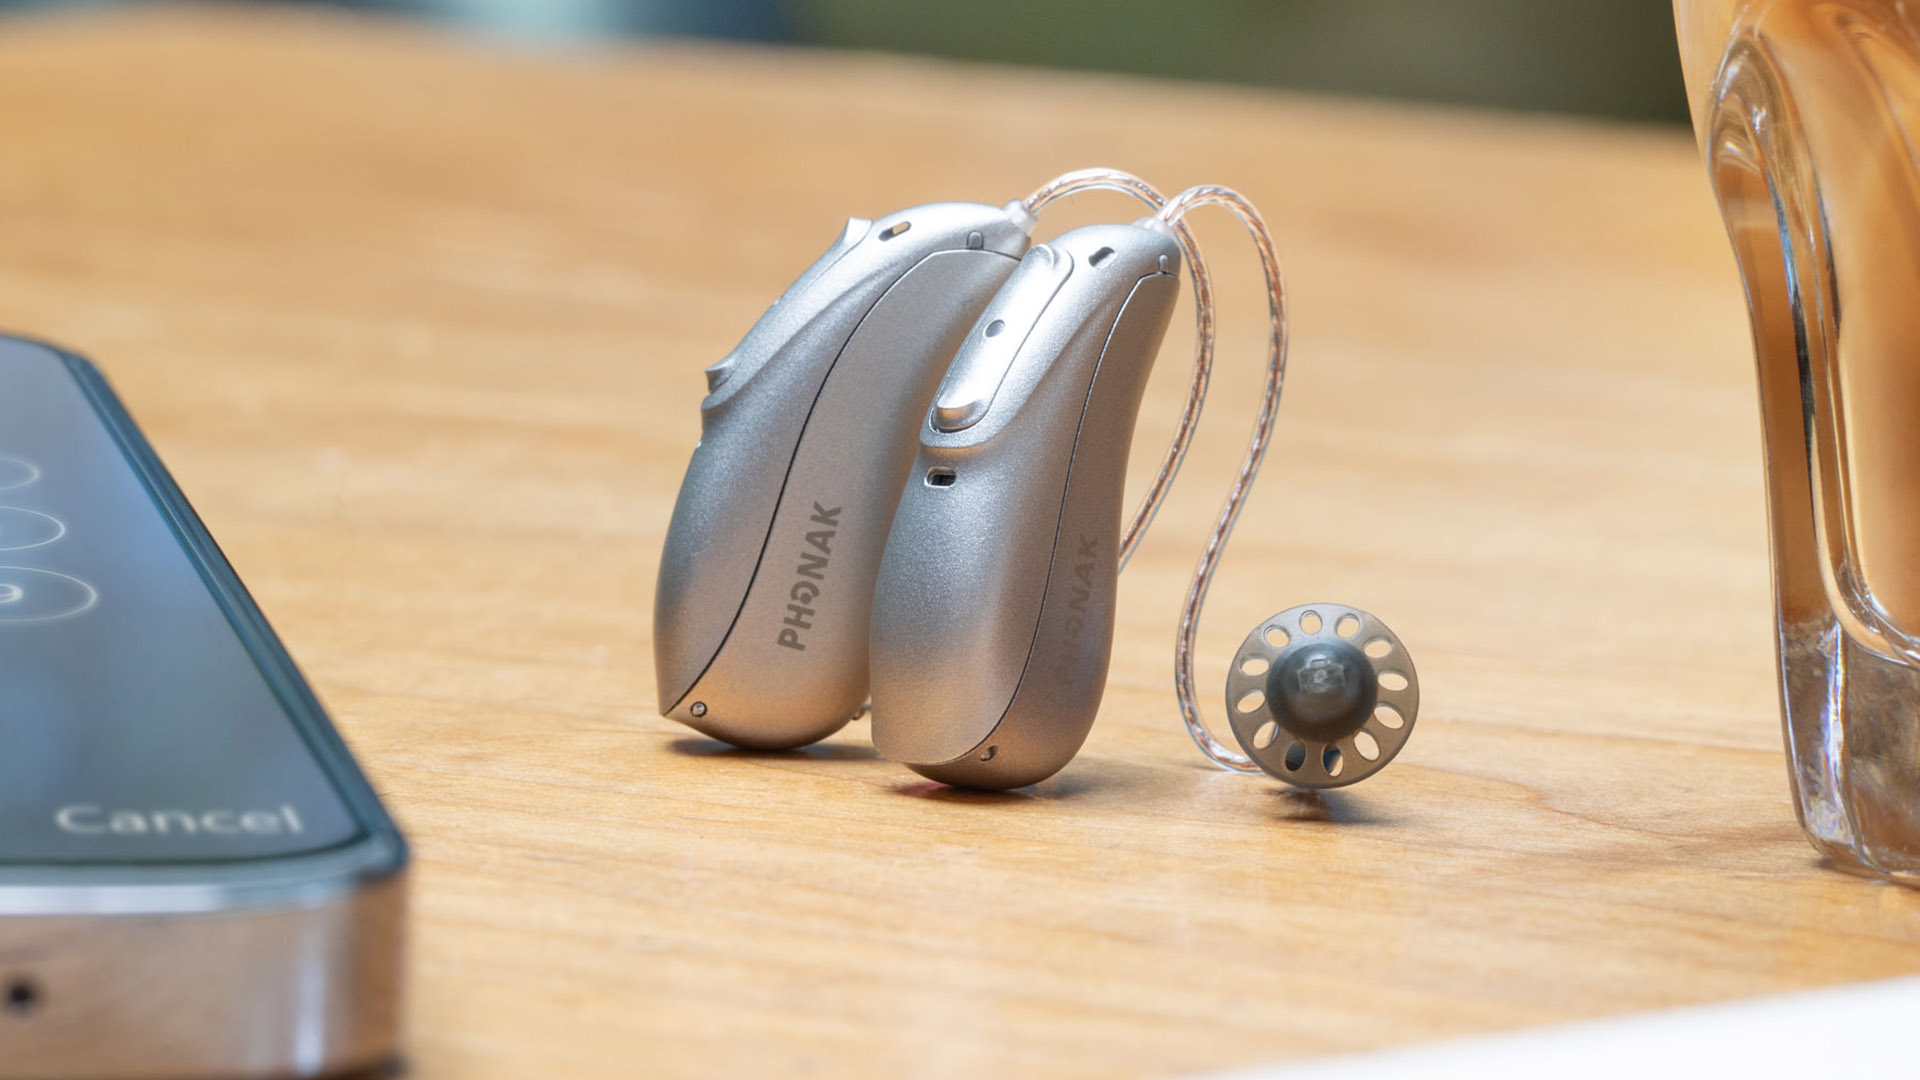 Windows 11 preview build now supports Bluetooth hearing aids